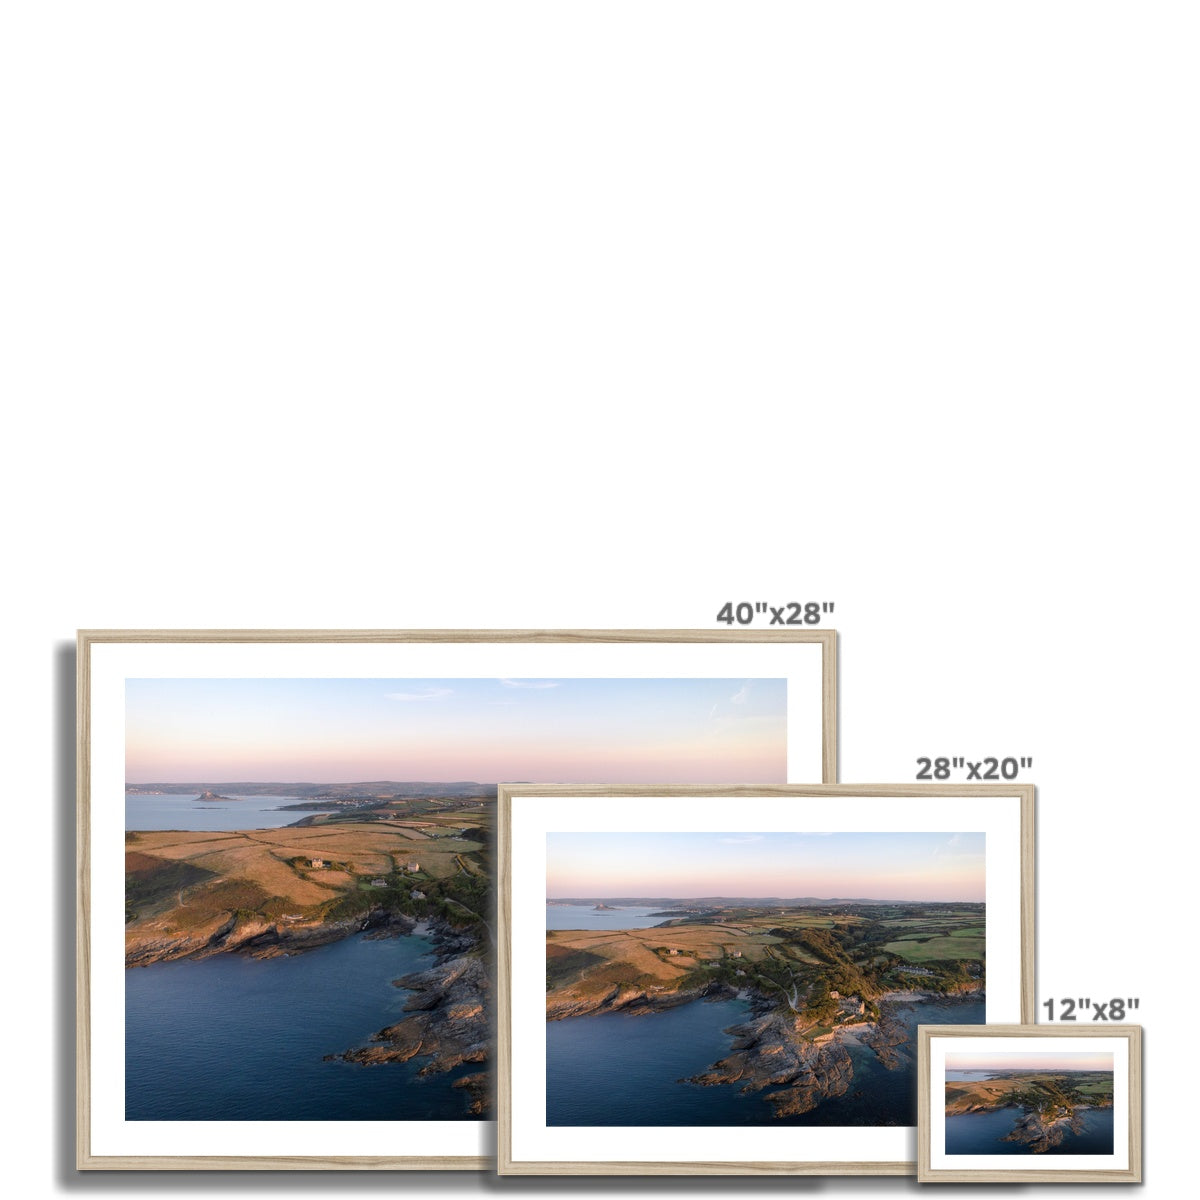 bessys prussia cove framed photograph